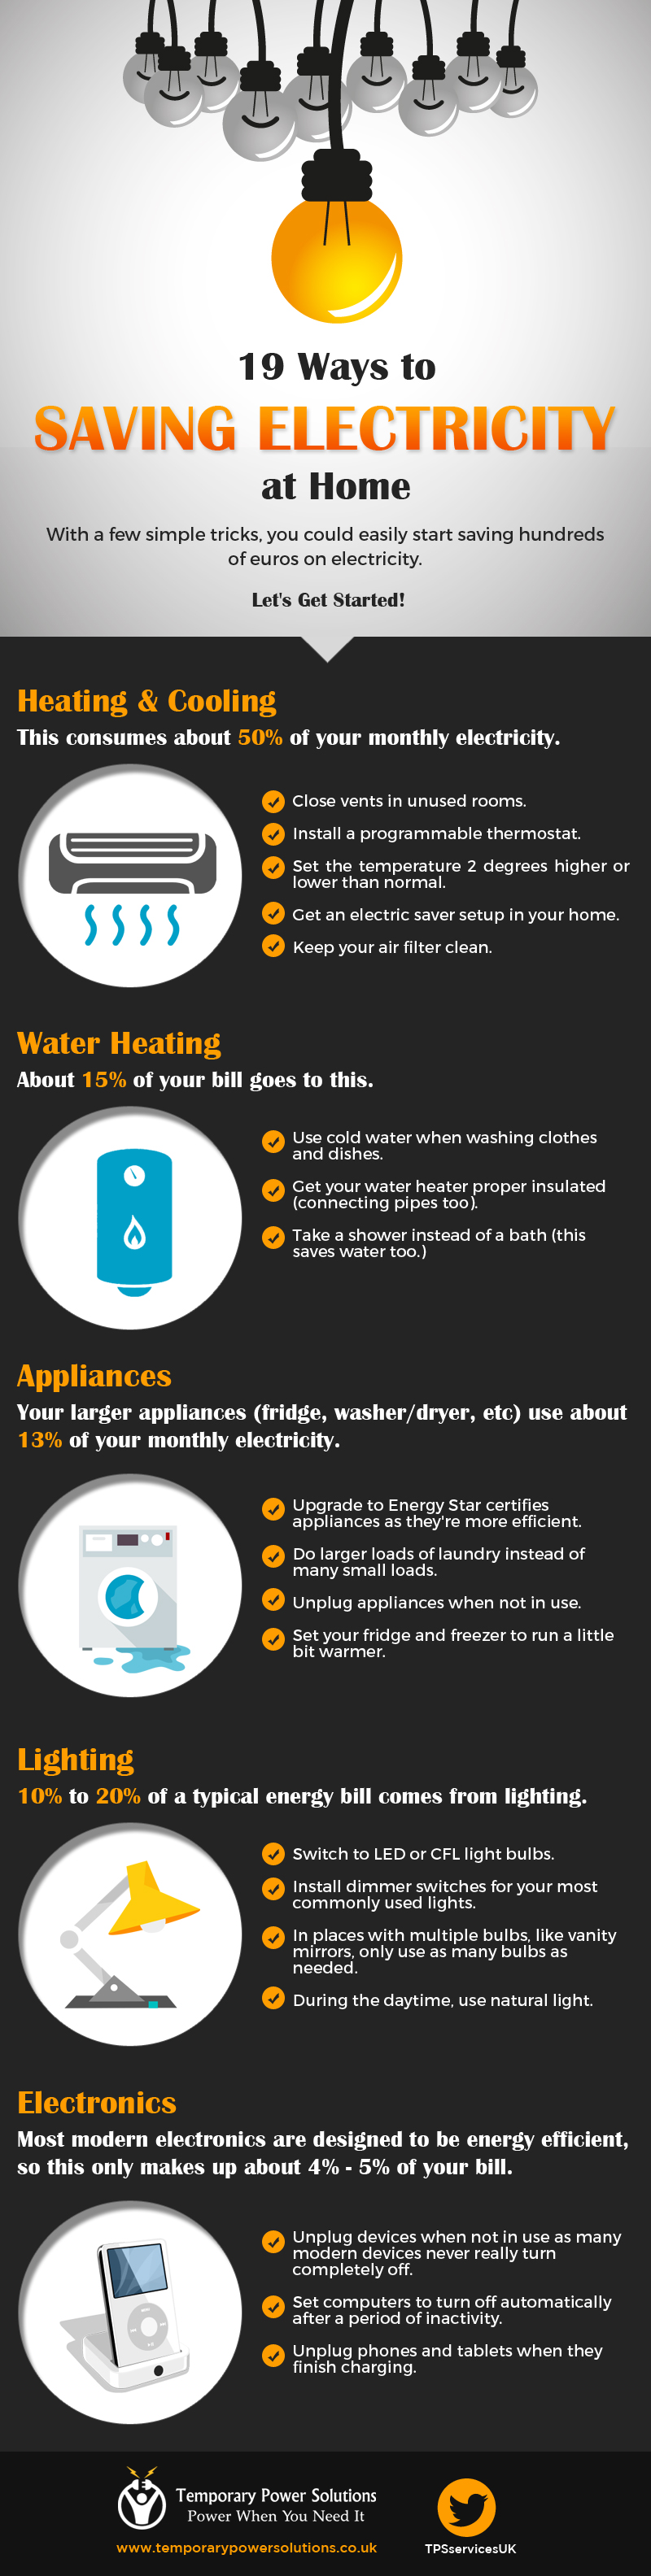 Ways to Save Electricity at Home